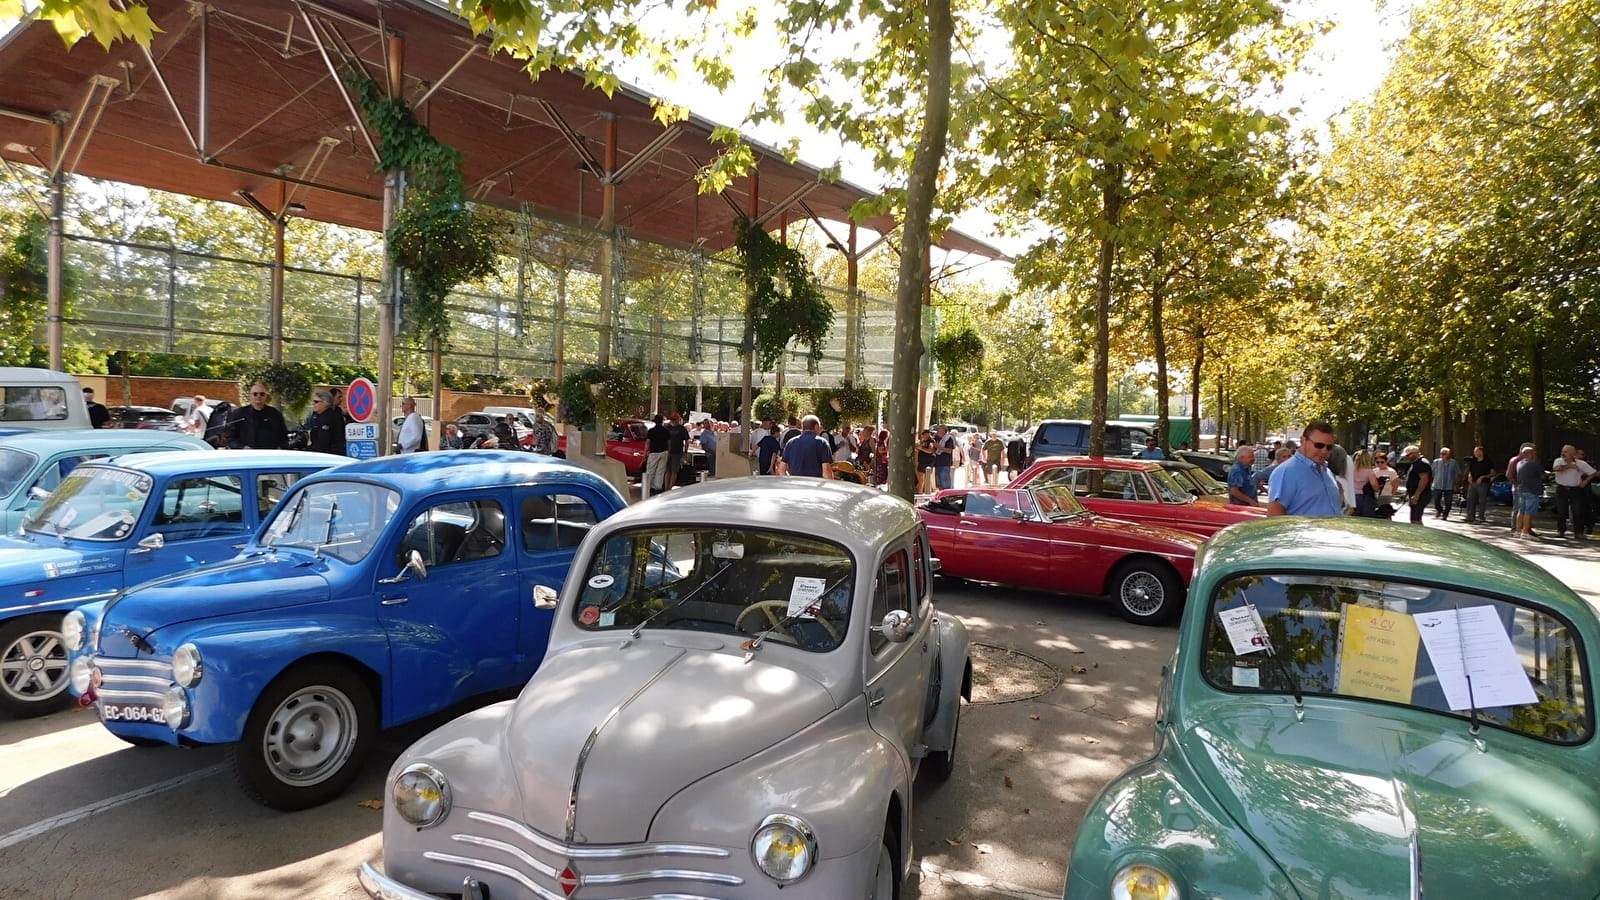 Gathering of classic and vintage vehicles